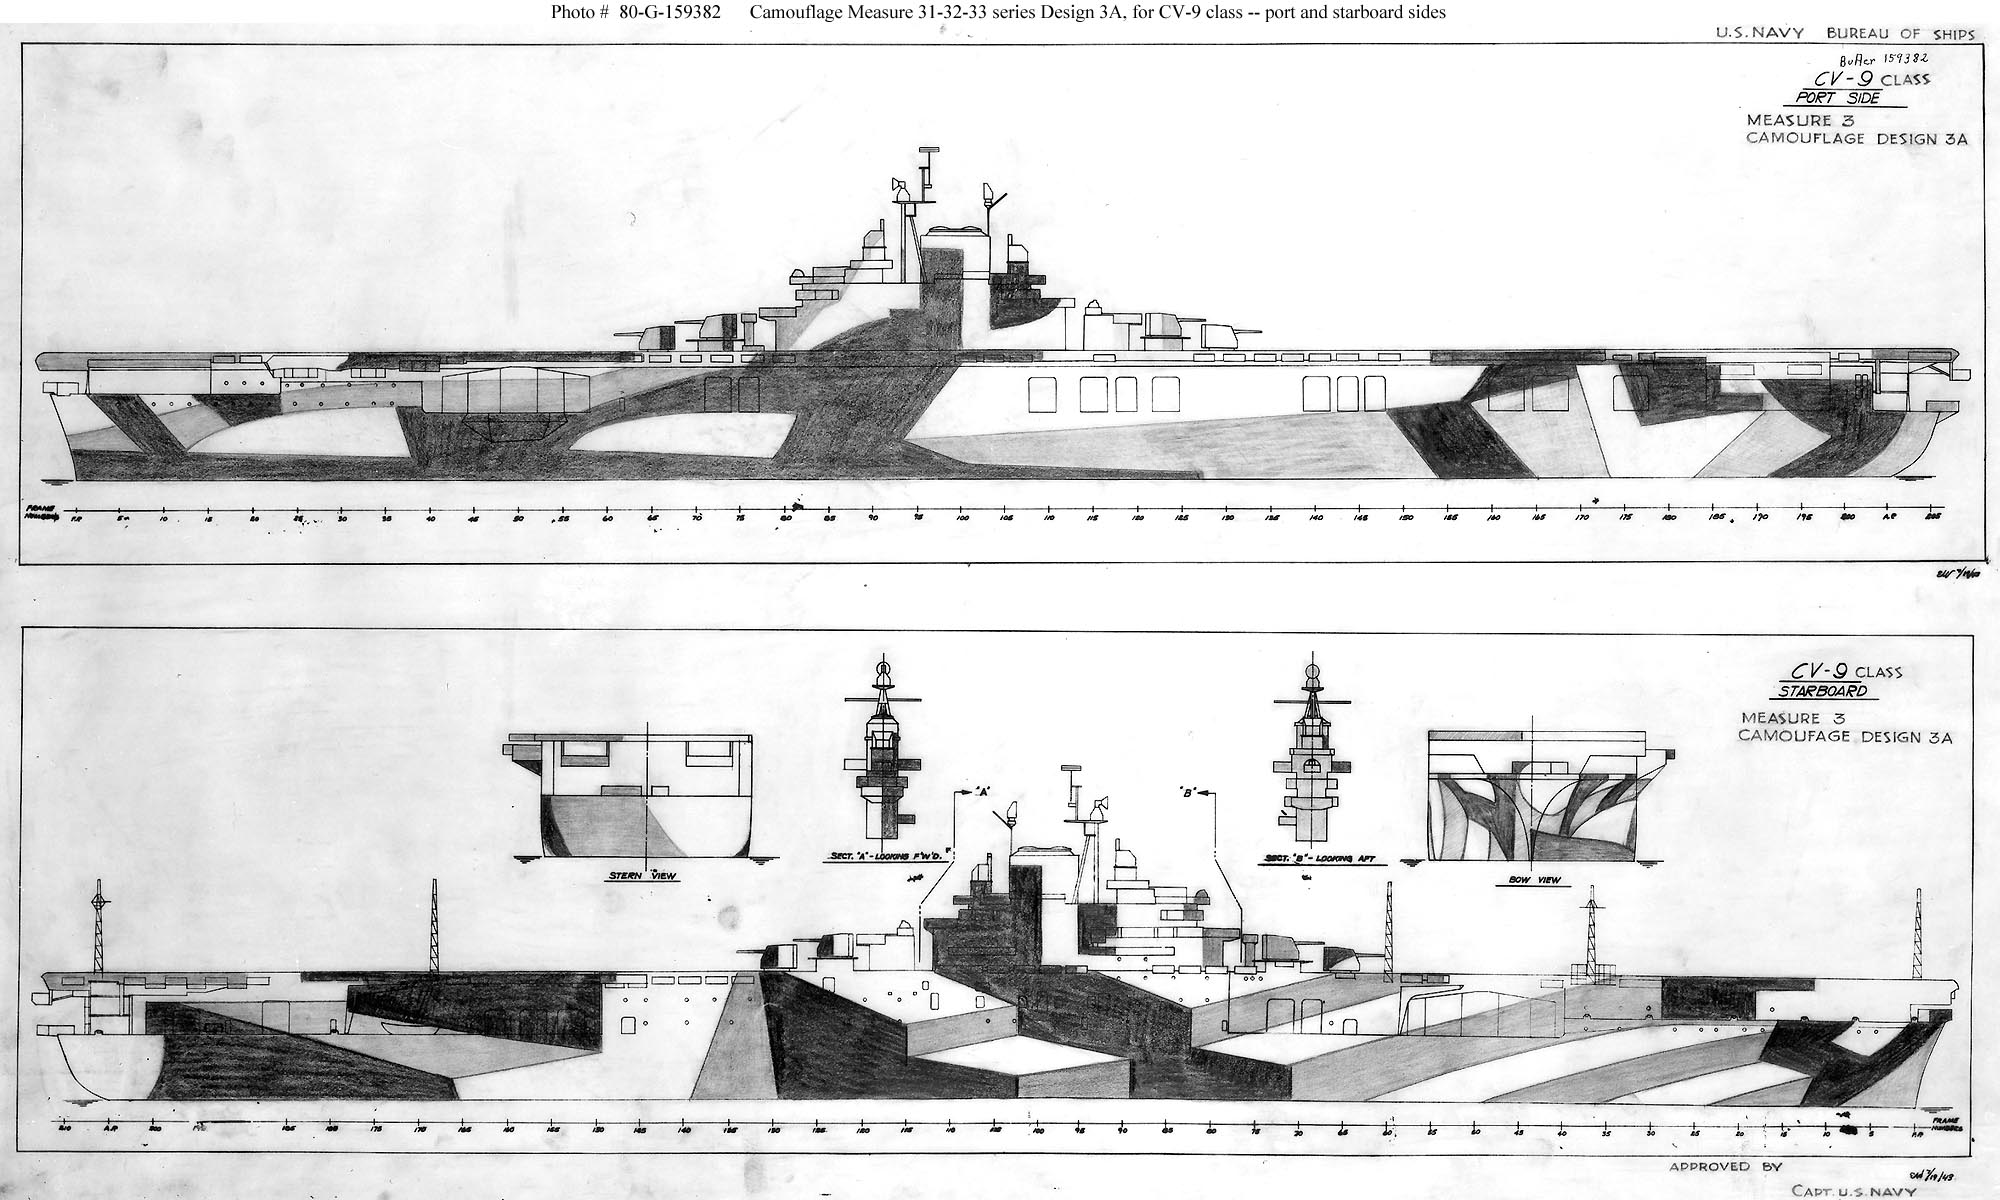 1944 plan for camouflage Measure 31-32-33, Design 3a on Essex-class fleet carriers. Of the 17 Essex-class carriers to see service during 1944-45, 3 were painted according to this plan plus 1 with this only on one side